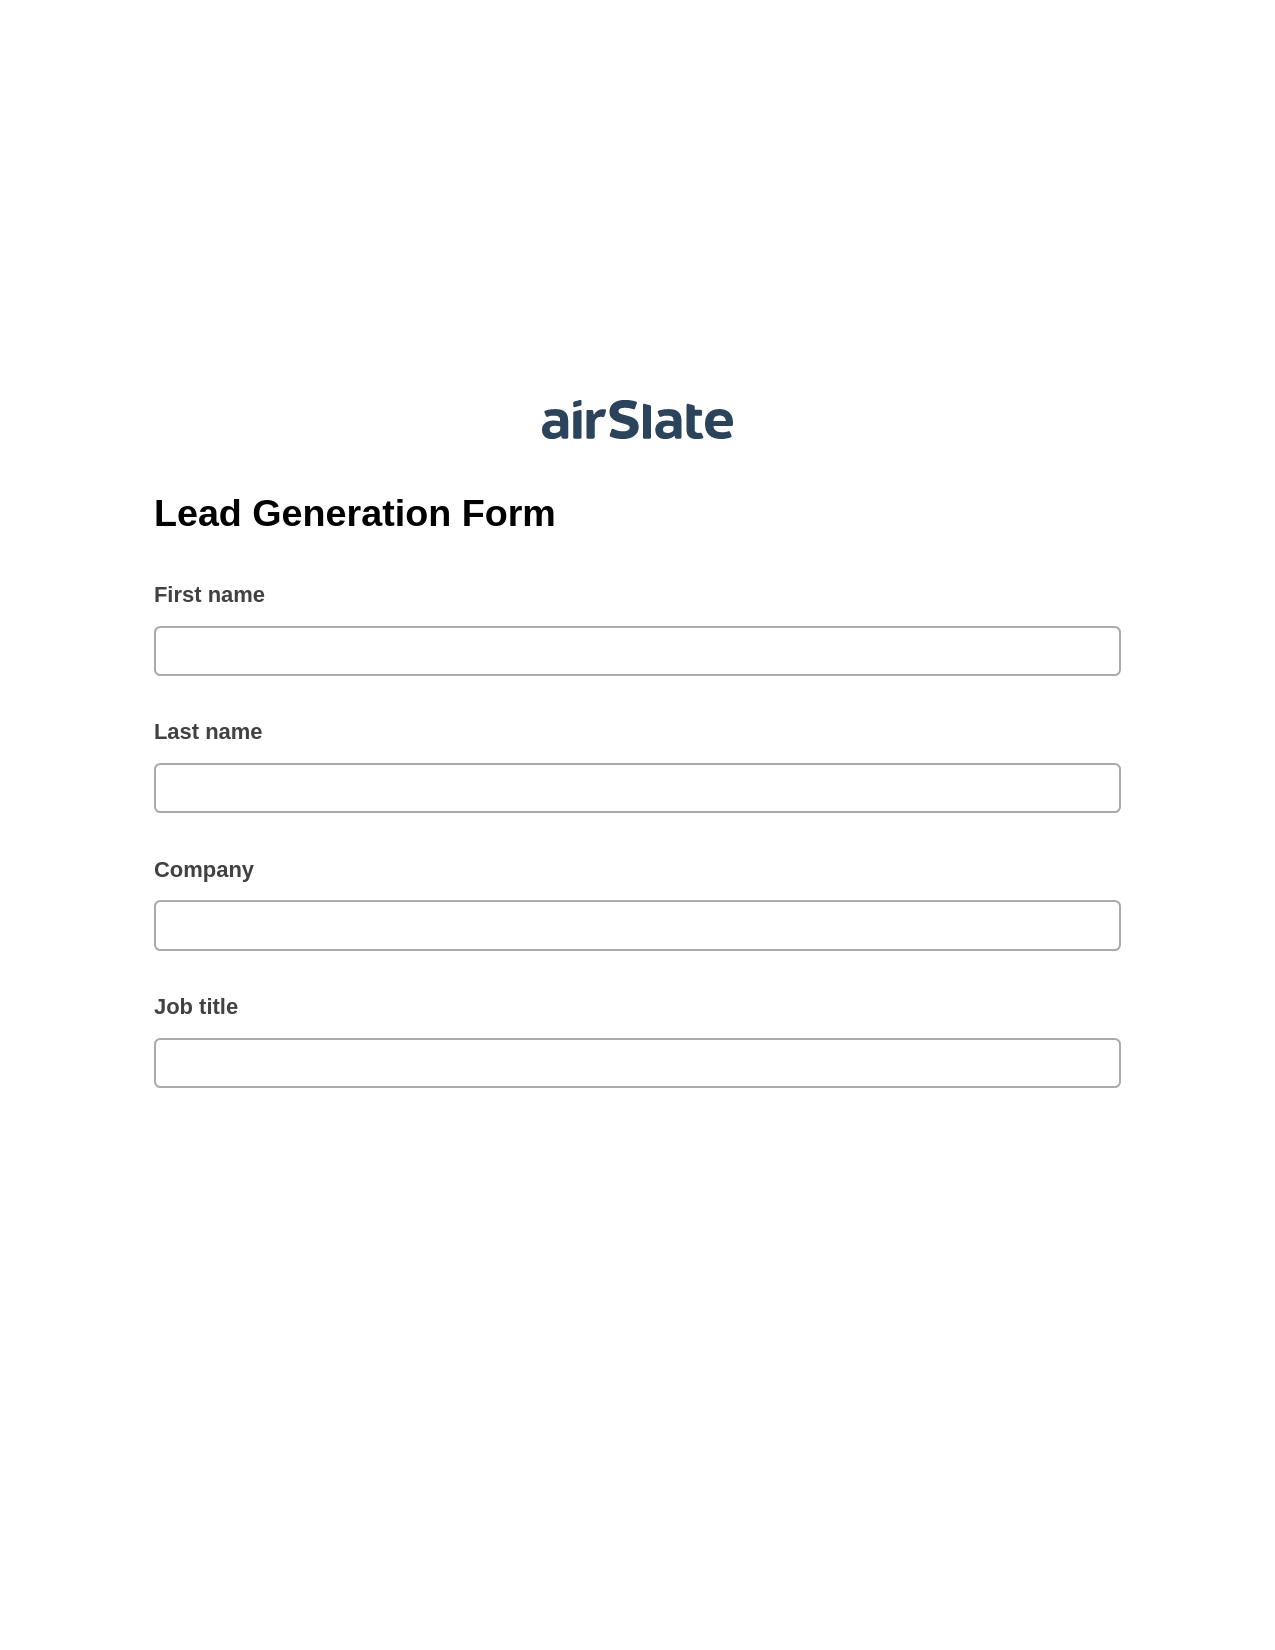 Lead Generation Form Pre-fill from MySQL Bot, Add Tags to Slate Bot, Archive to OneDrive Bot